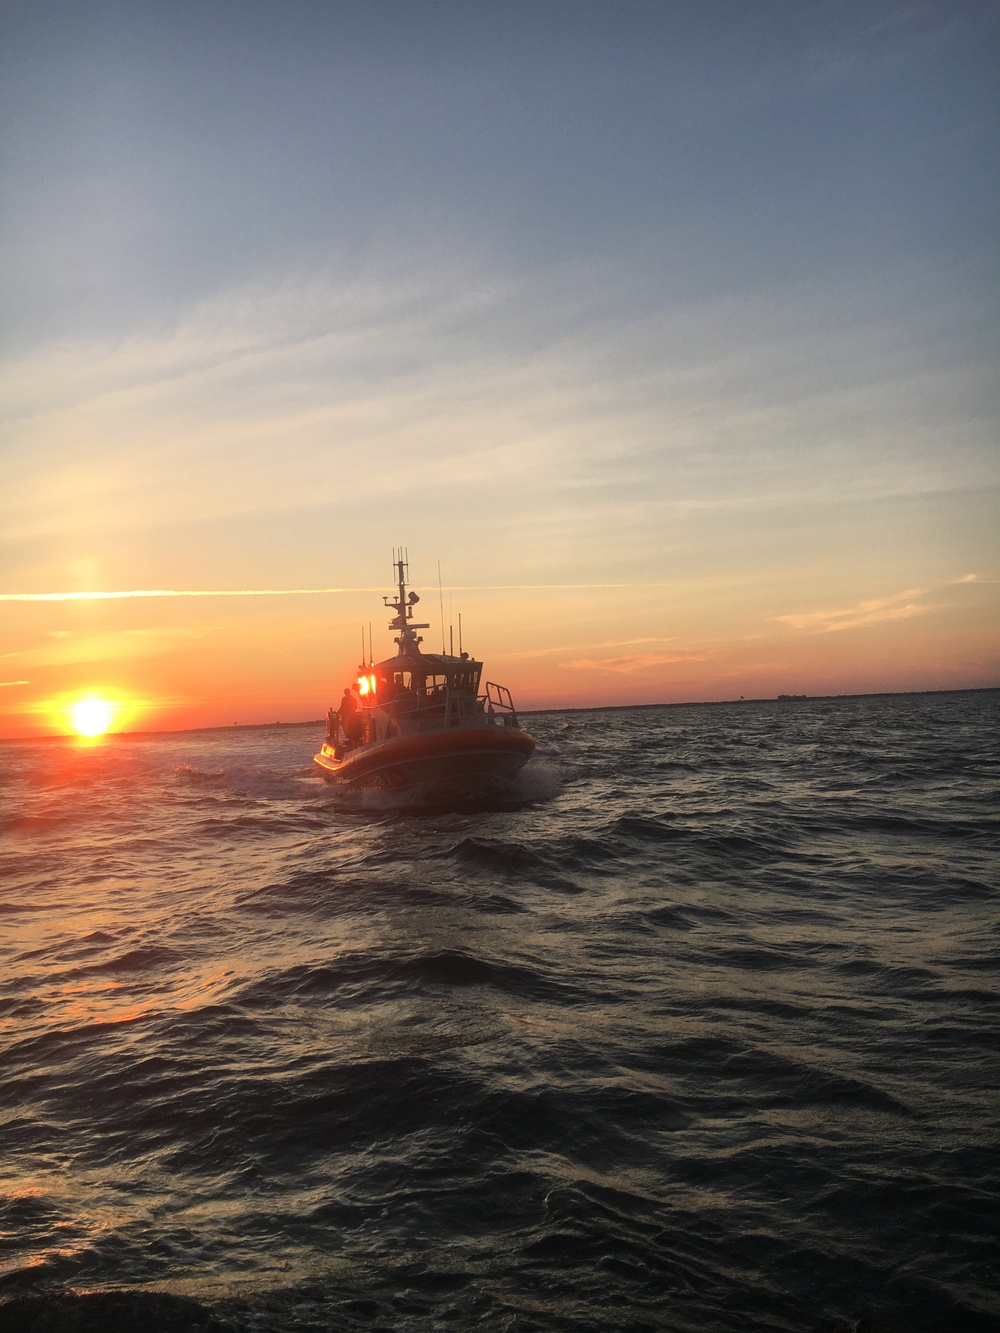 Coast Guard rescues 4 adults, 1 child from water near Masonboro Inlet, NC